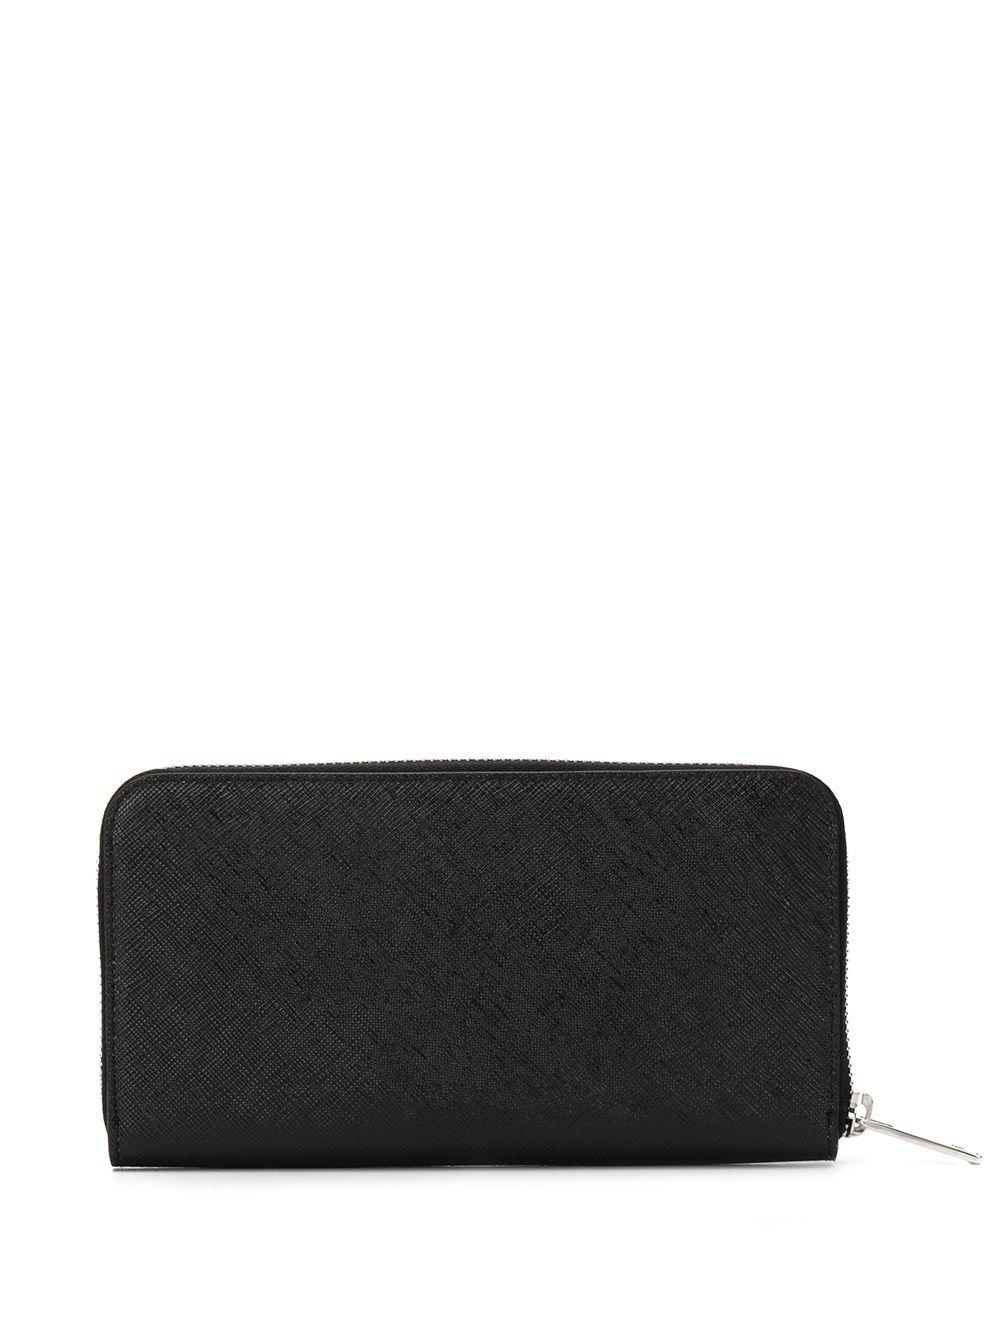 Givenchy Iconic Leather Zip Wallet in Black - Save 17% - Lyst